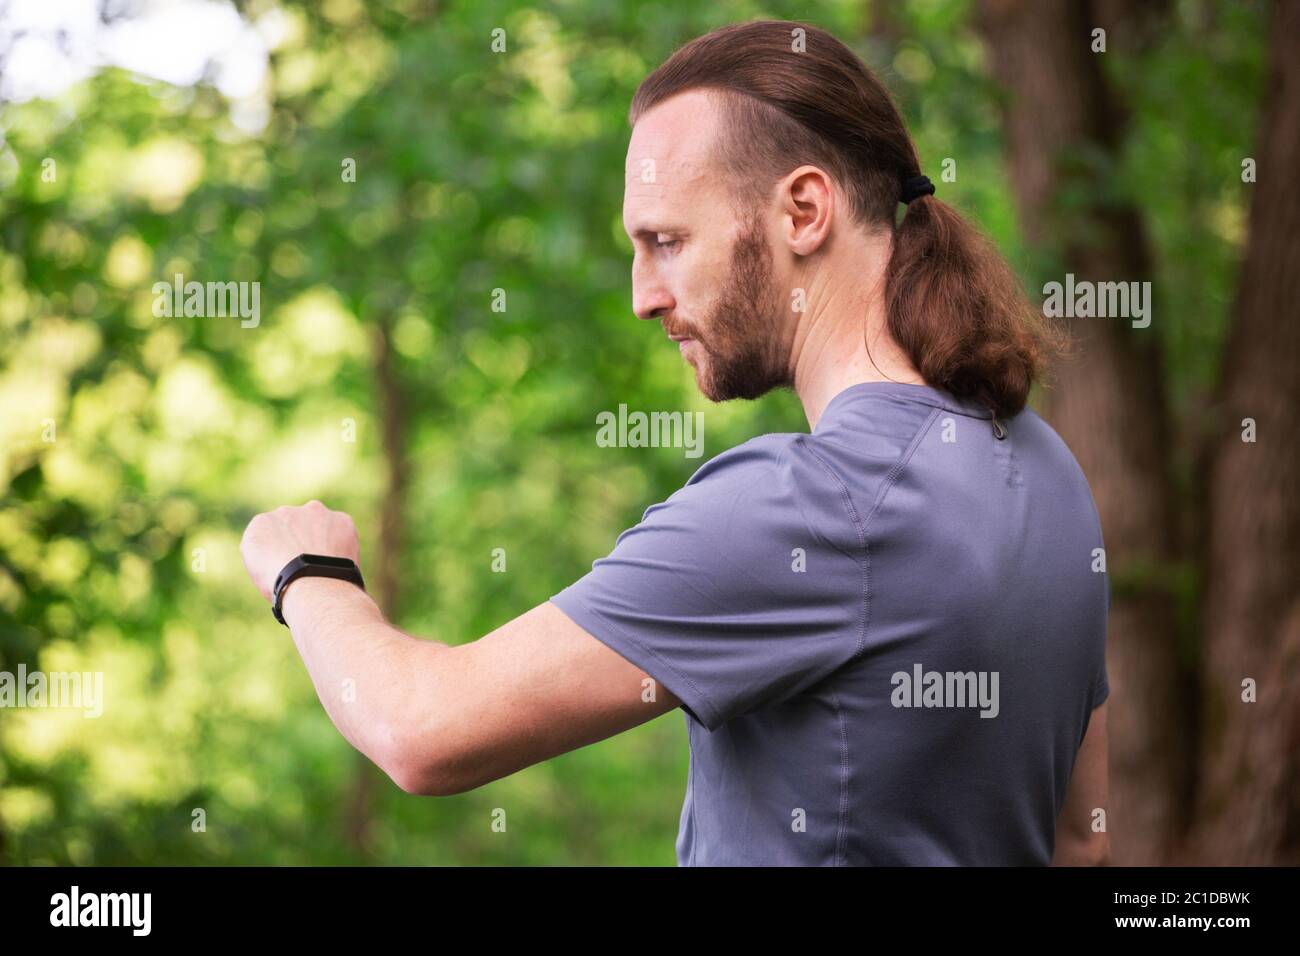 Athlete sport man runner is looking at smart watch bracelet at park, healthy lifestyle, healthcare, activity concept Stock Photo